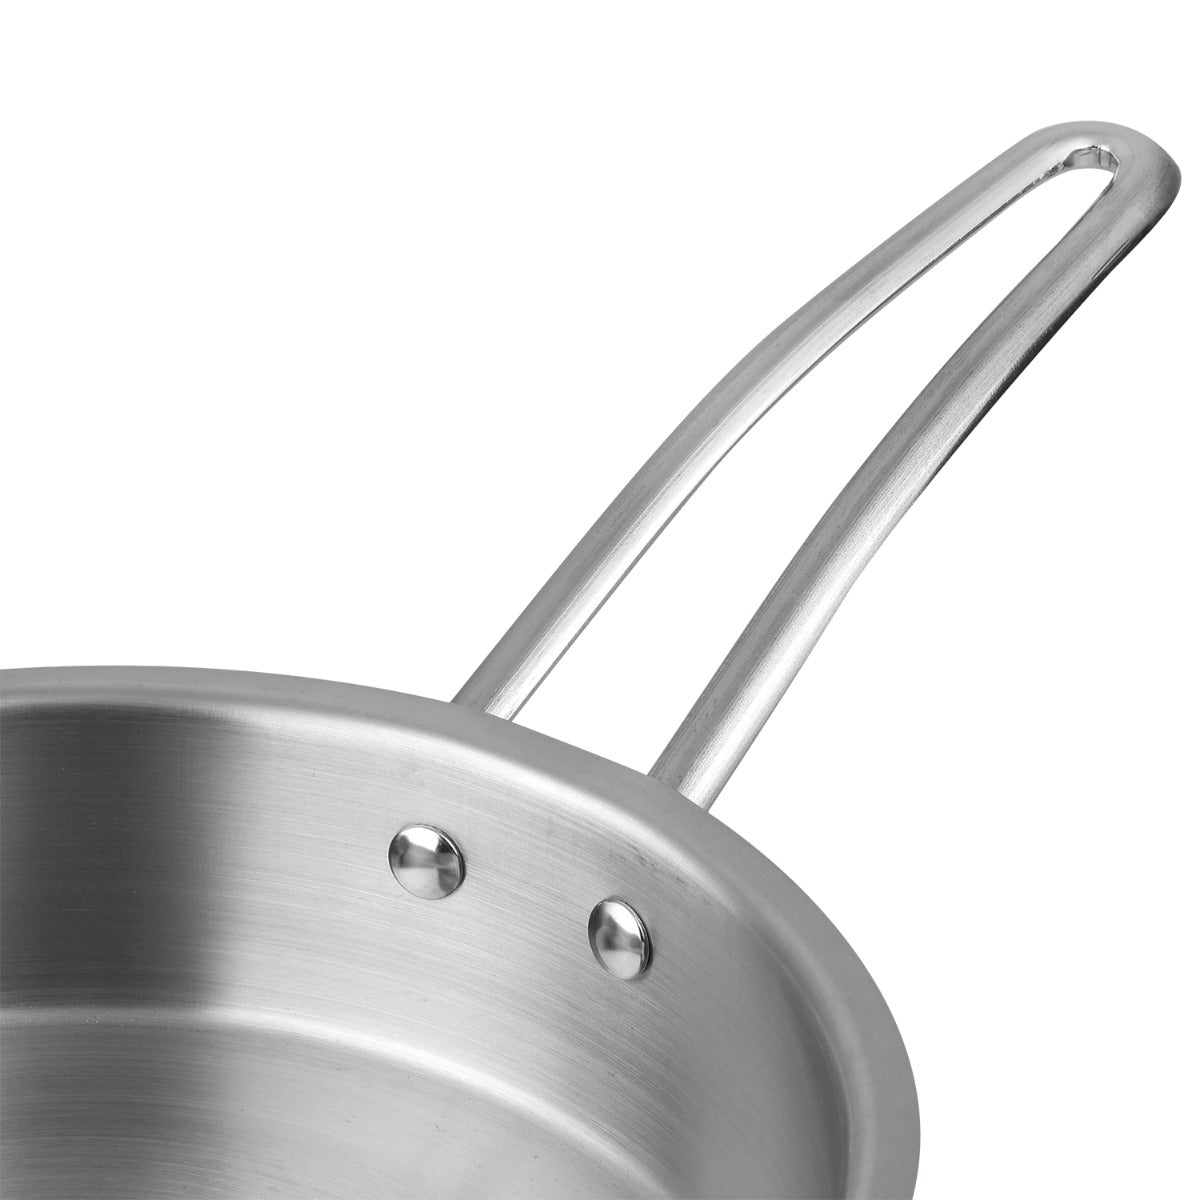 Riveted Stay Cool Handles of Classique Deluxe Cookware Set